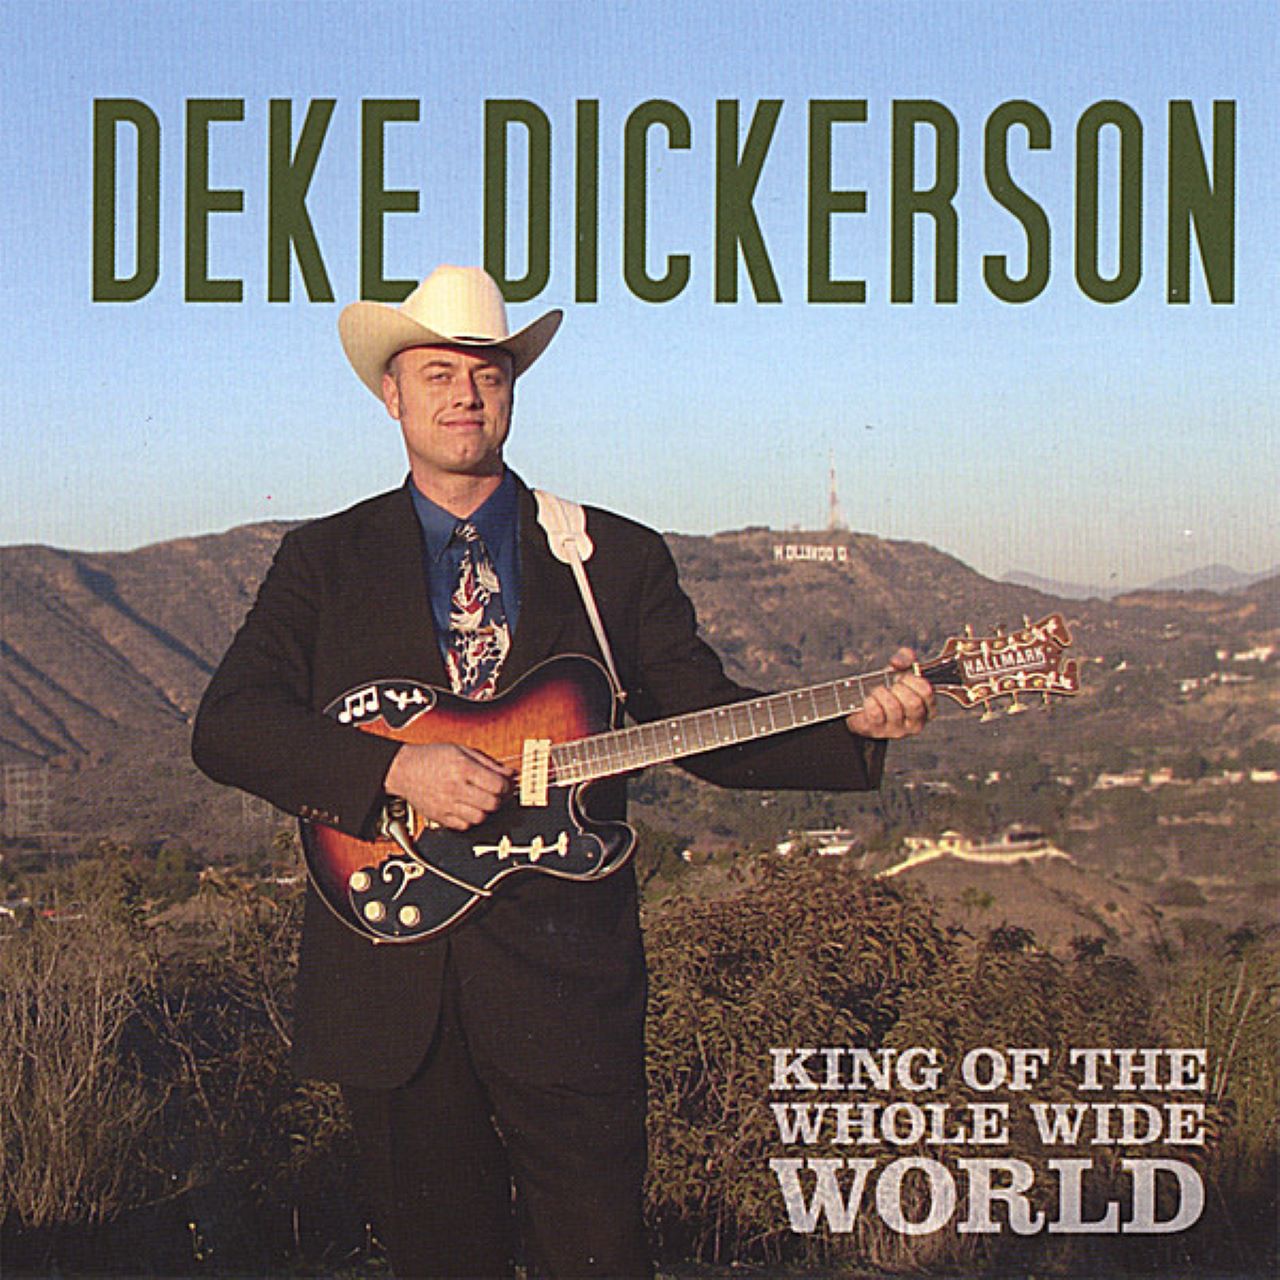 Deke Dickerson – “King Of The Whole Wide World” cover album